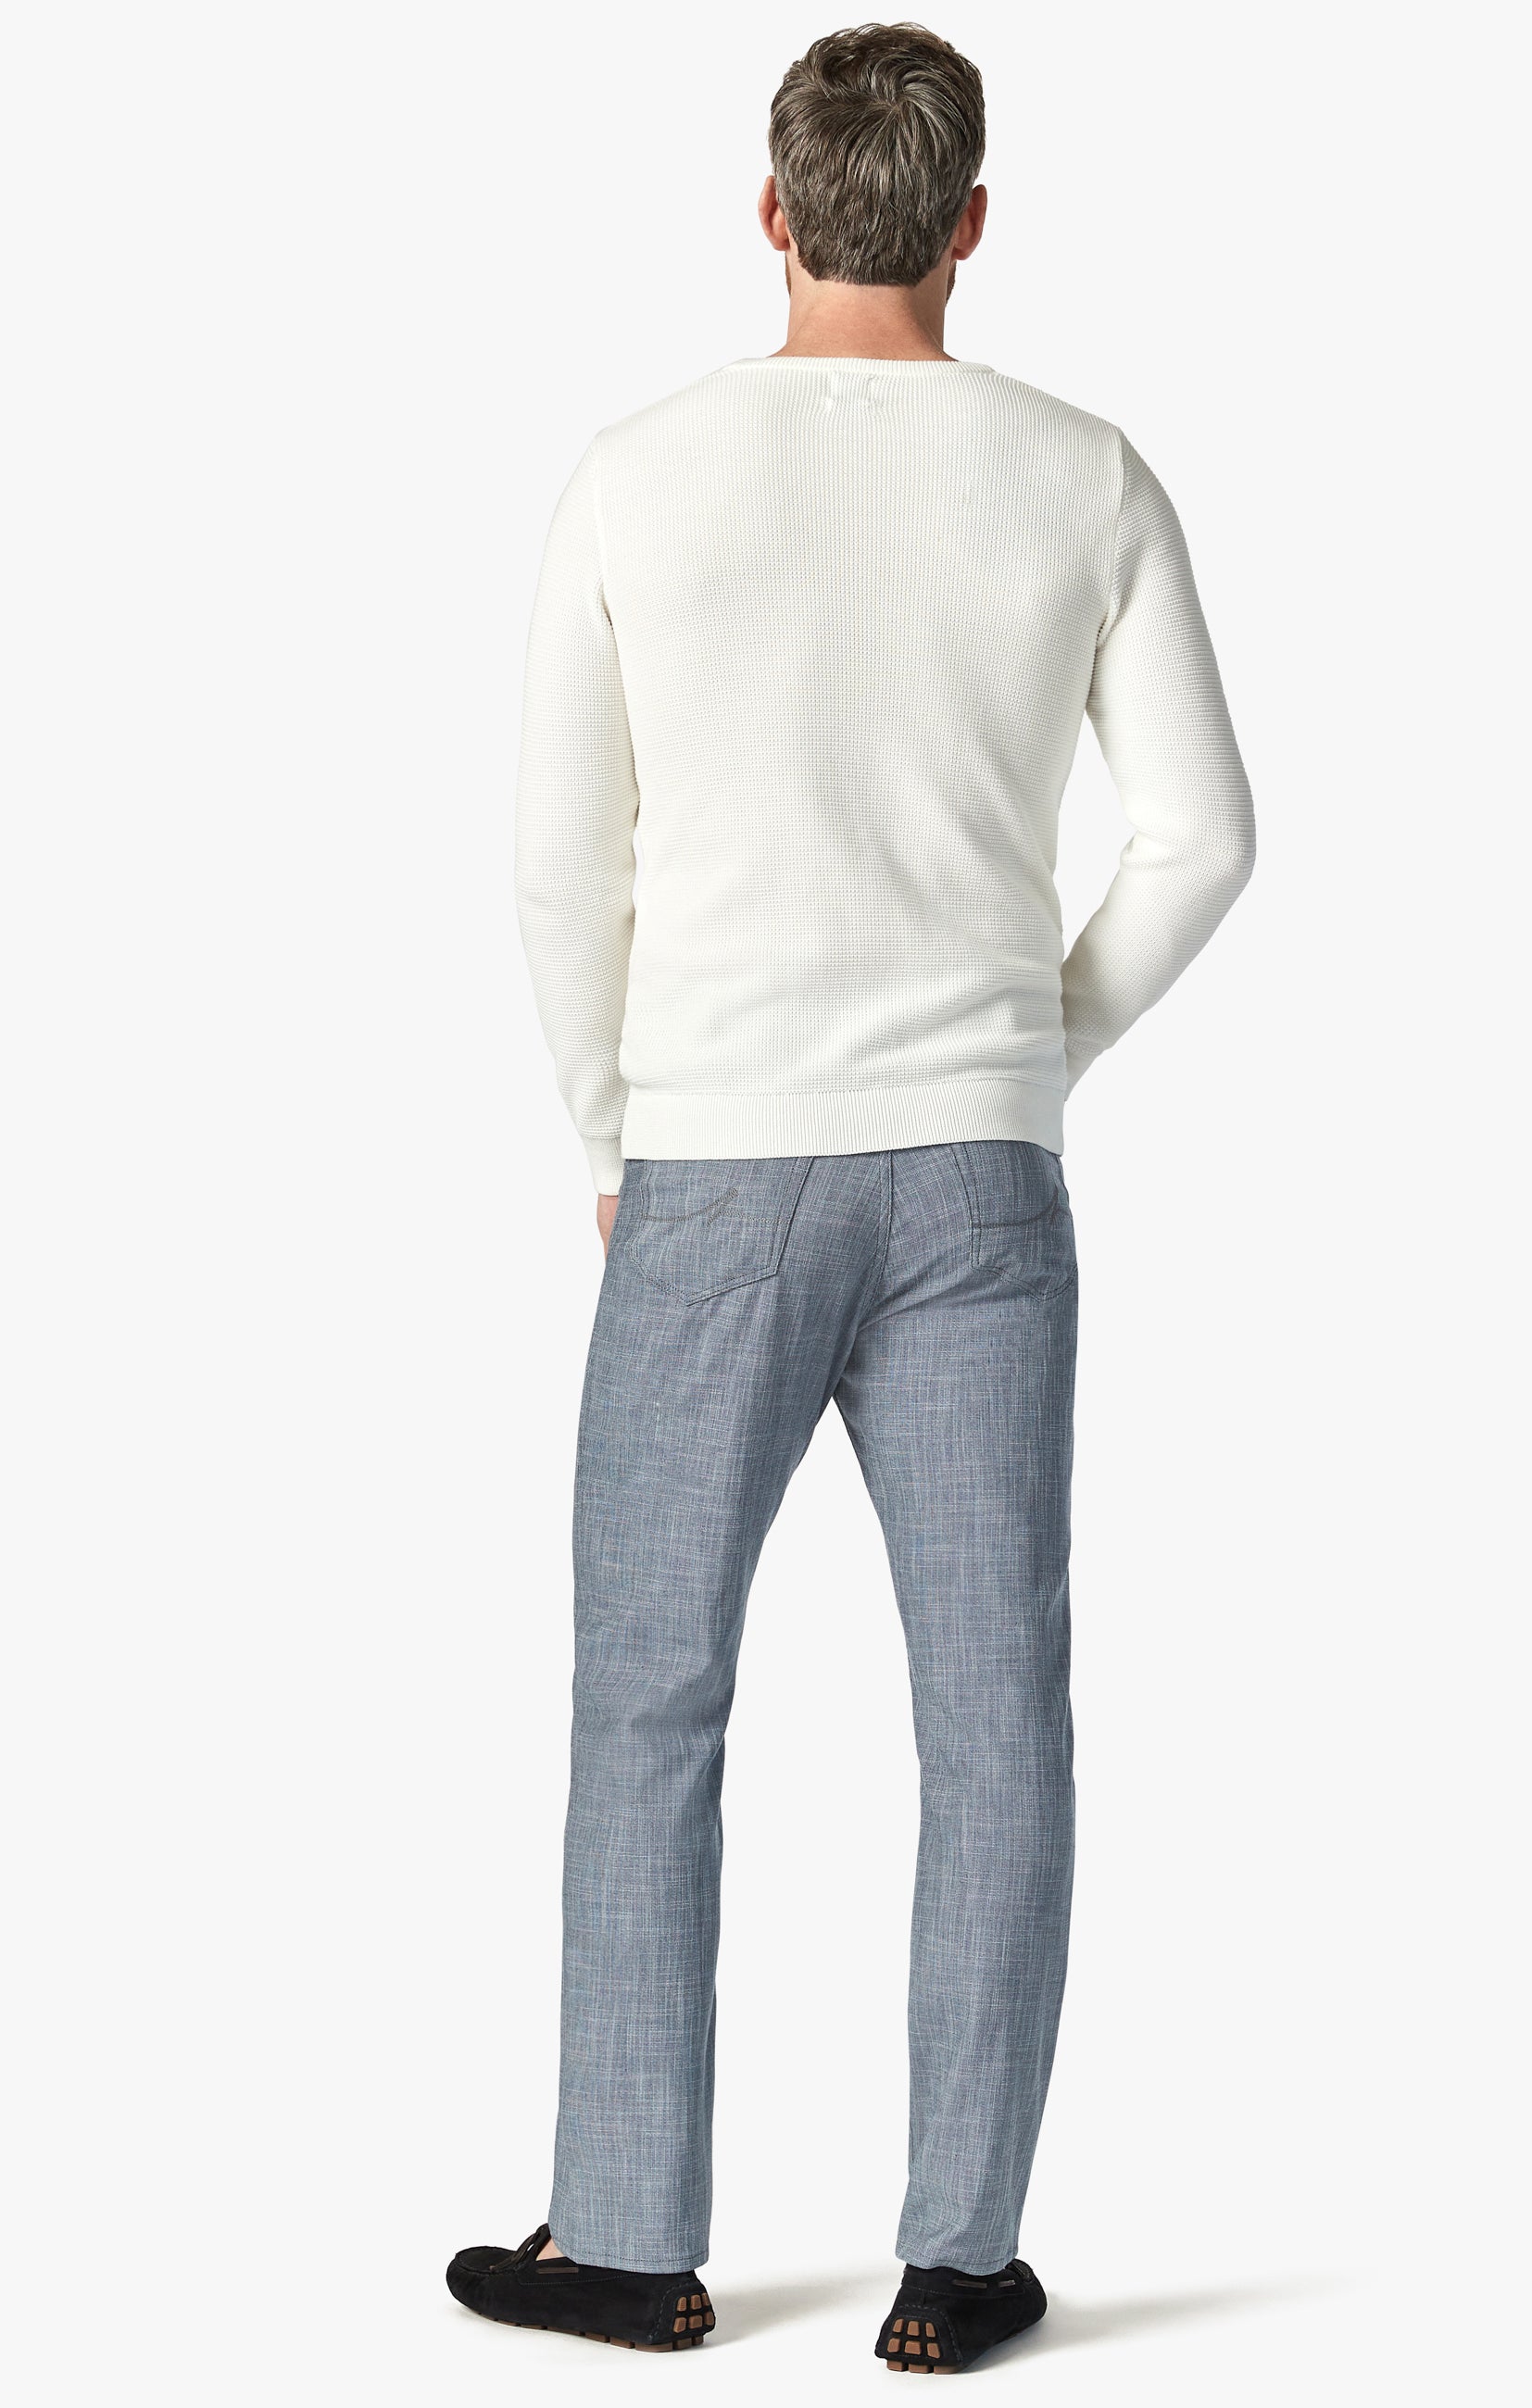 Charisma Relaxed Straight Pants in Grey Cross Twill Image 5